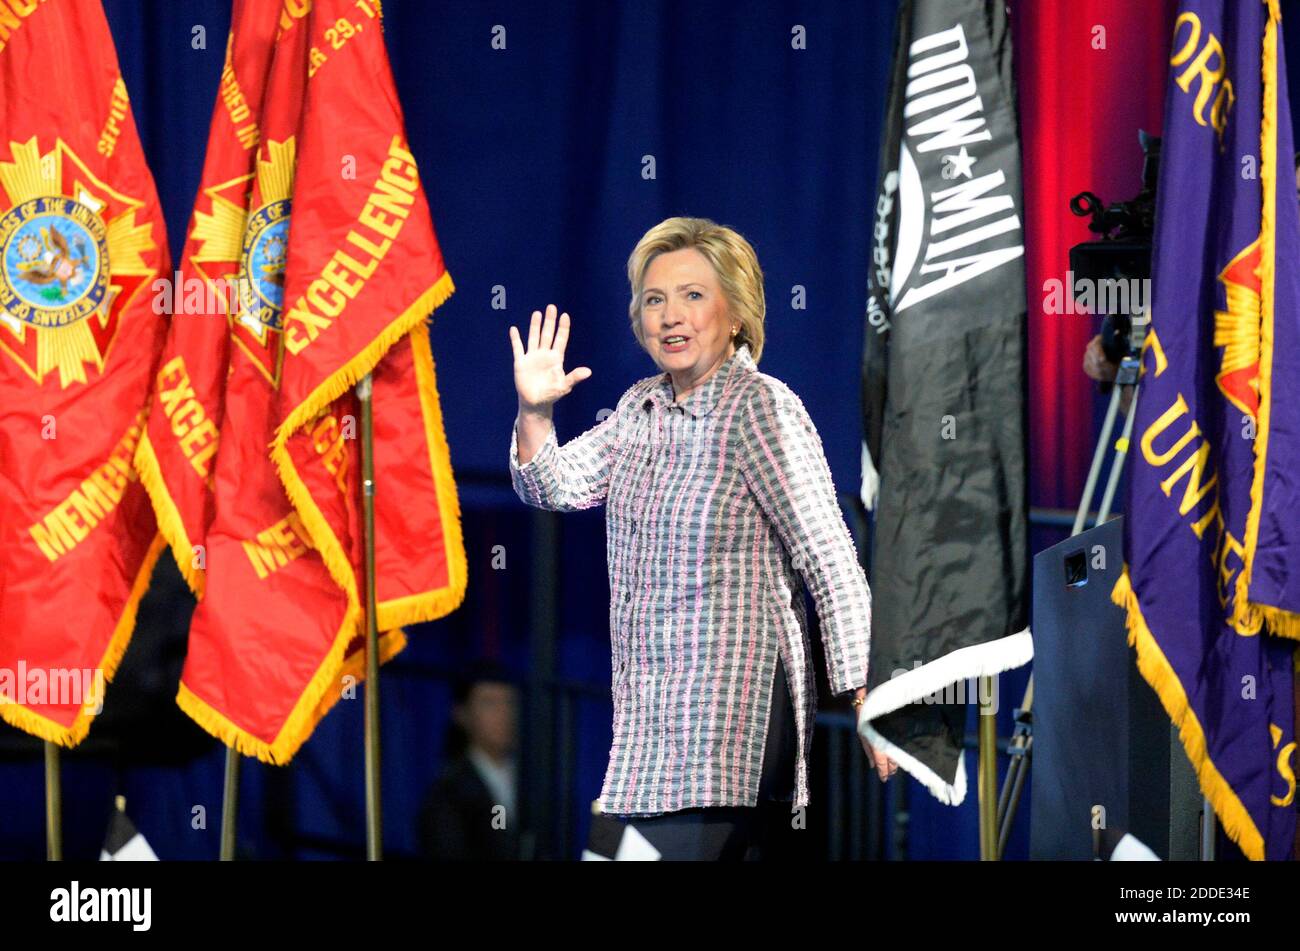 NO FILM, NO VIDEO, NO TV, NO DOCUMENTARY - Hillary Clinton, the presumptive Democratic presidential nominee, waves to the crowd as she steps onstage to address the 117th annual VFW National Convention at the Charlotte Convention center on Monday, July 25, 2016 in Charlotte, NC, USA. Photo by David T. Foster III/Charlotte Observer/TNS/ABACAPRESS.COM Stock Photo